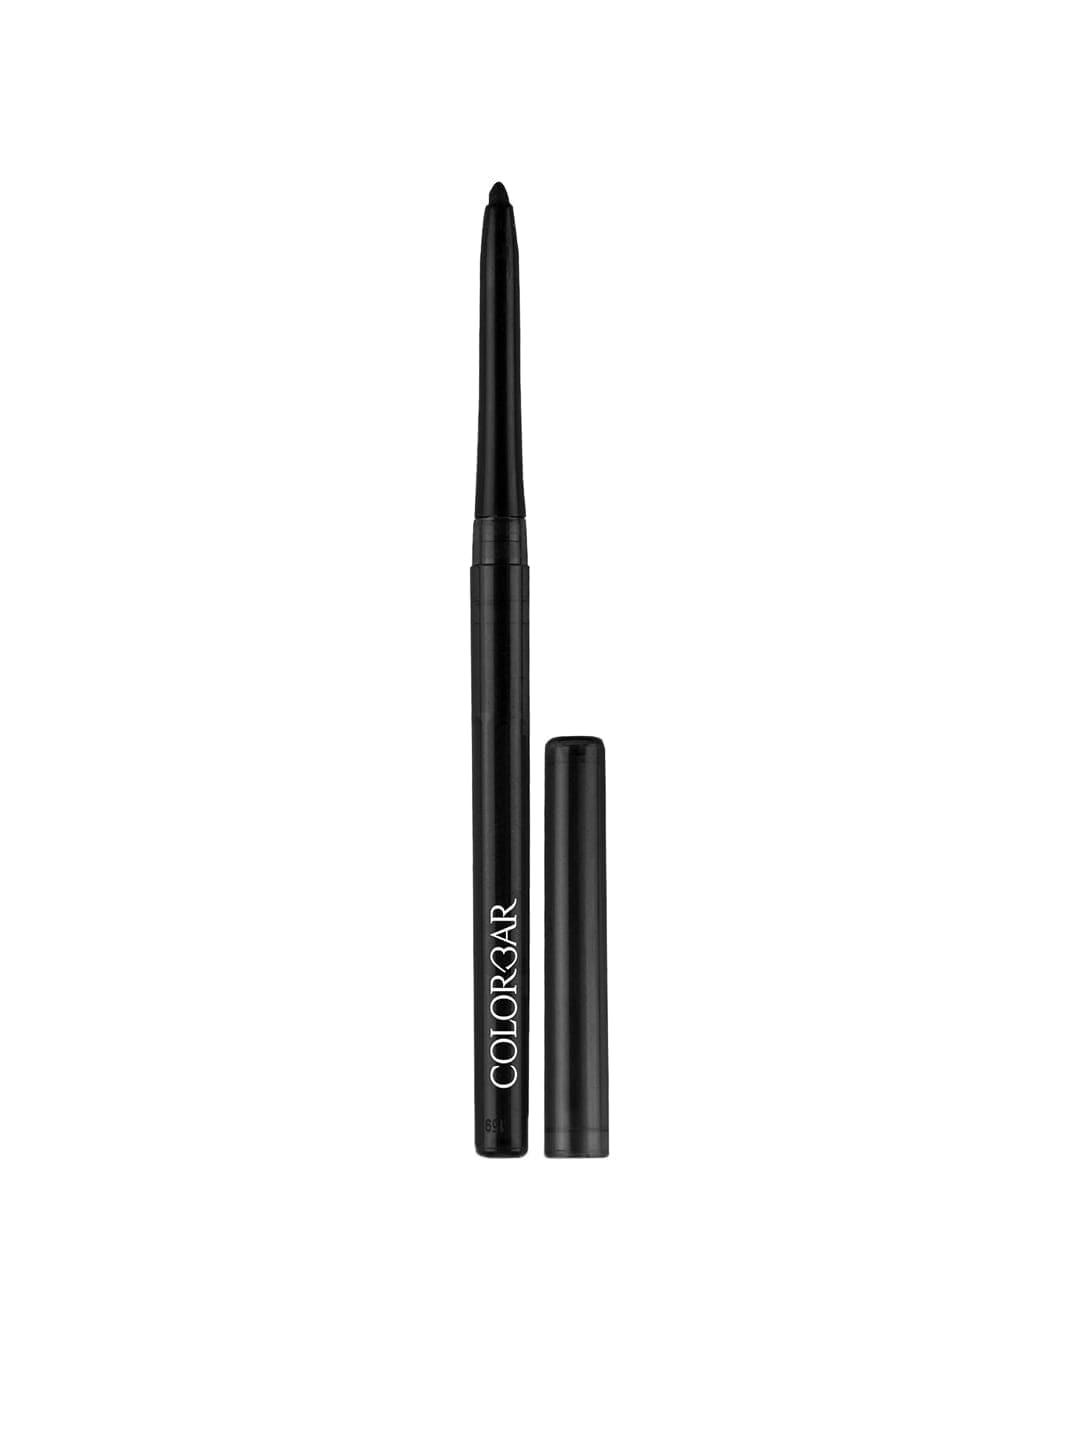 Colorbar All-Rounder Pencil - Pitch Black 010 0.29g